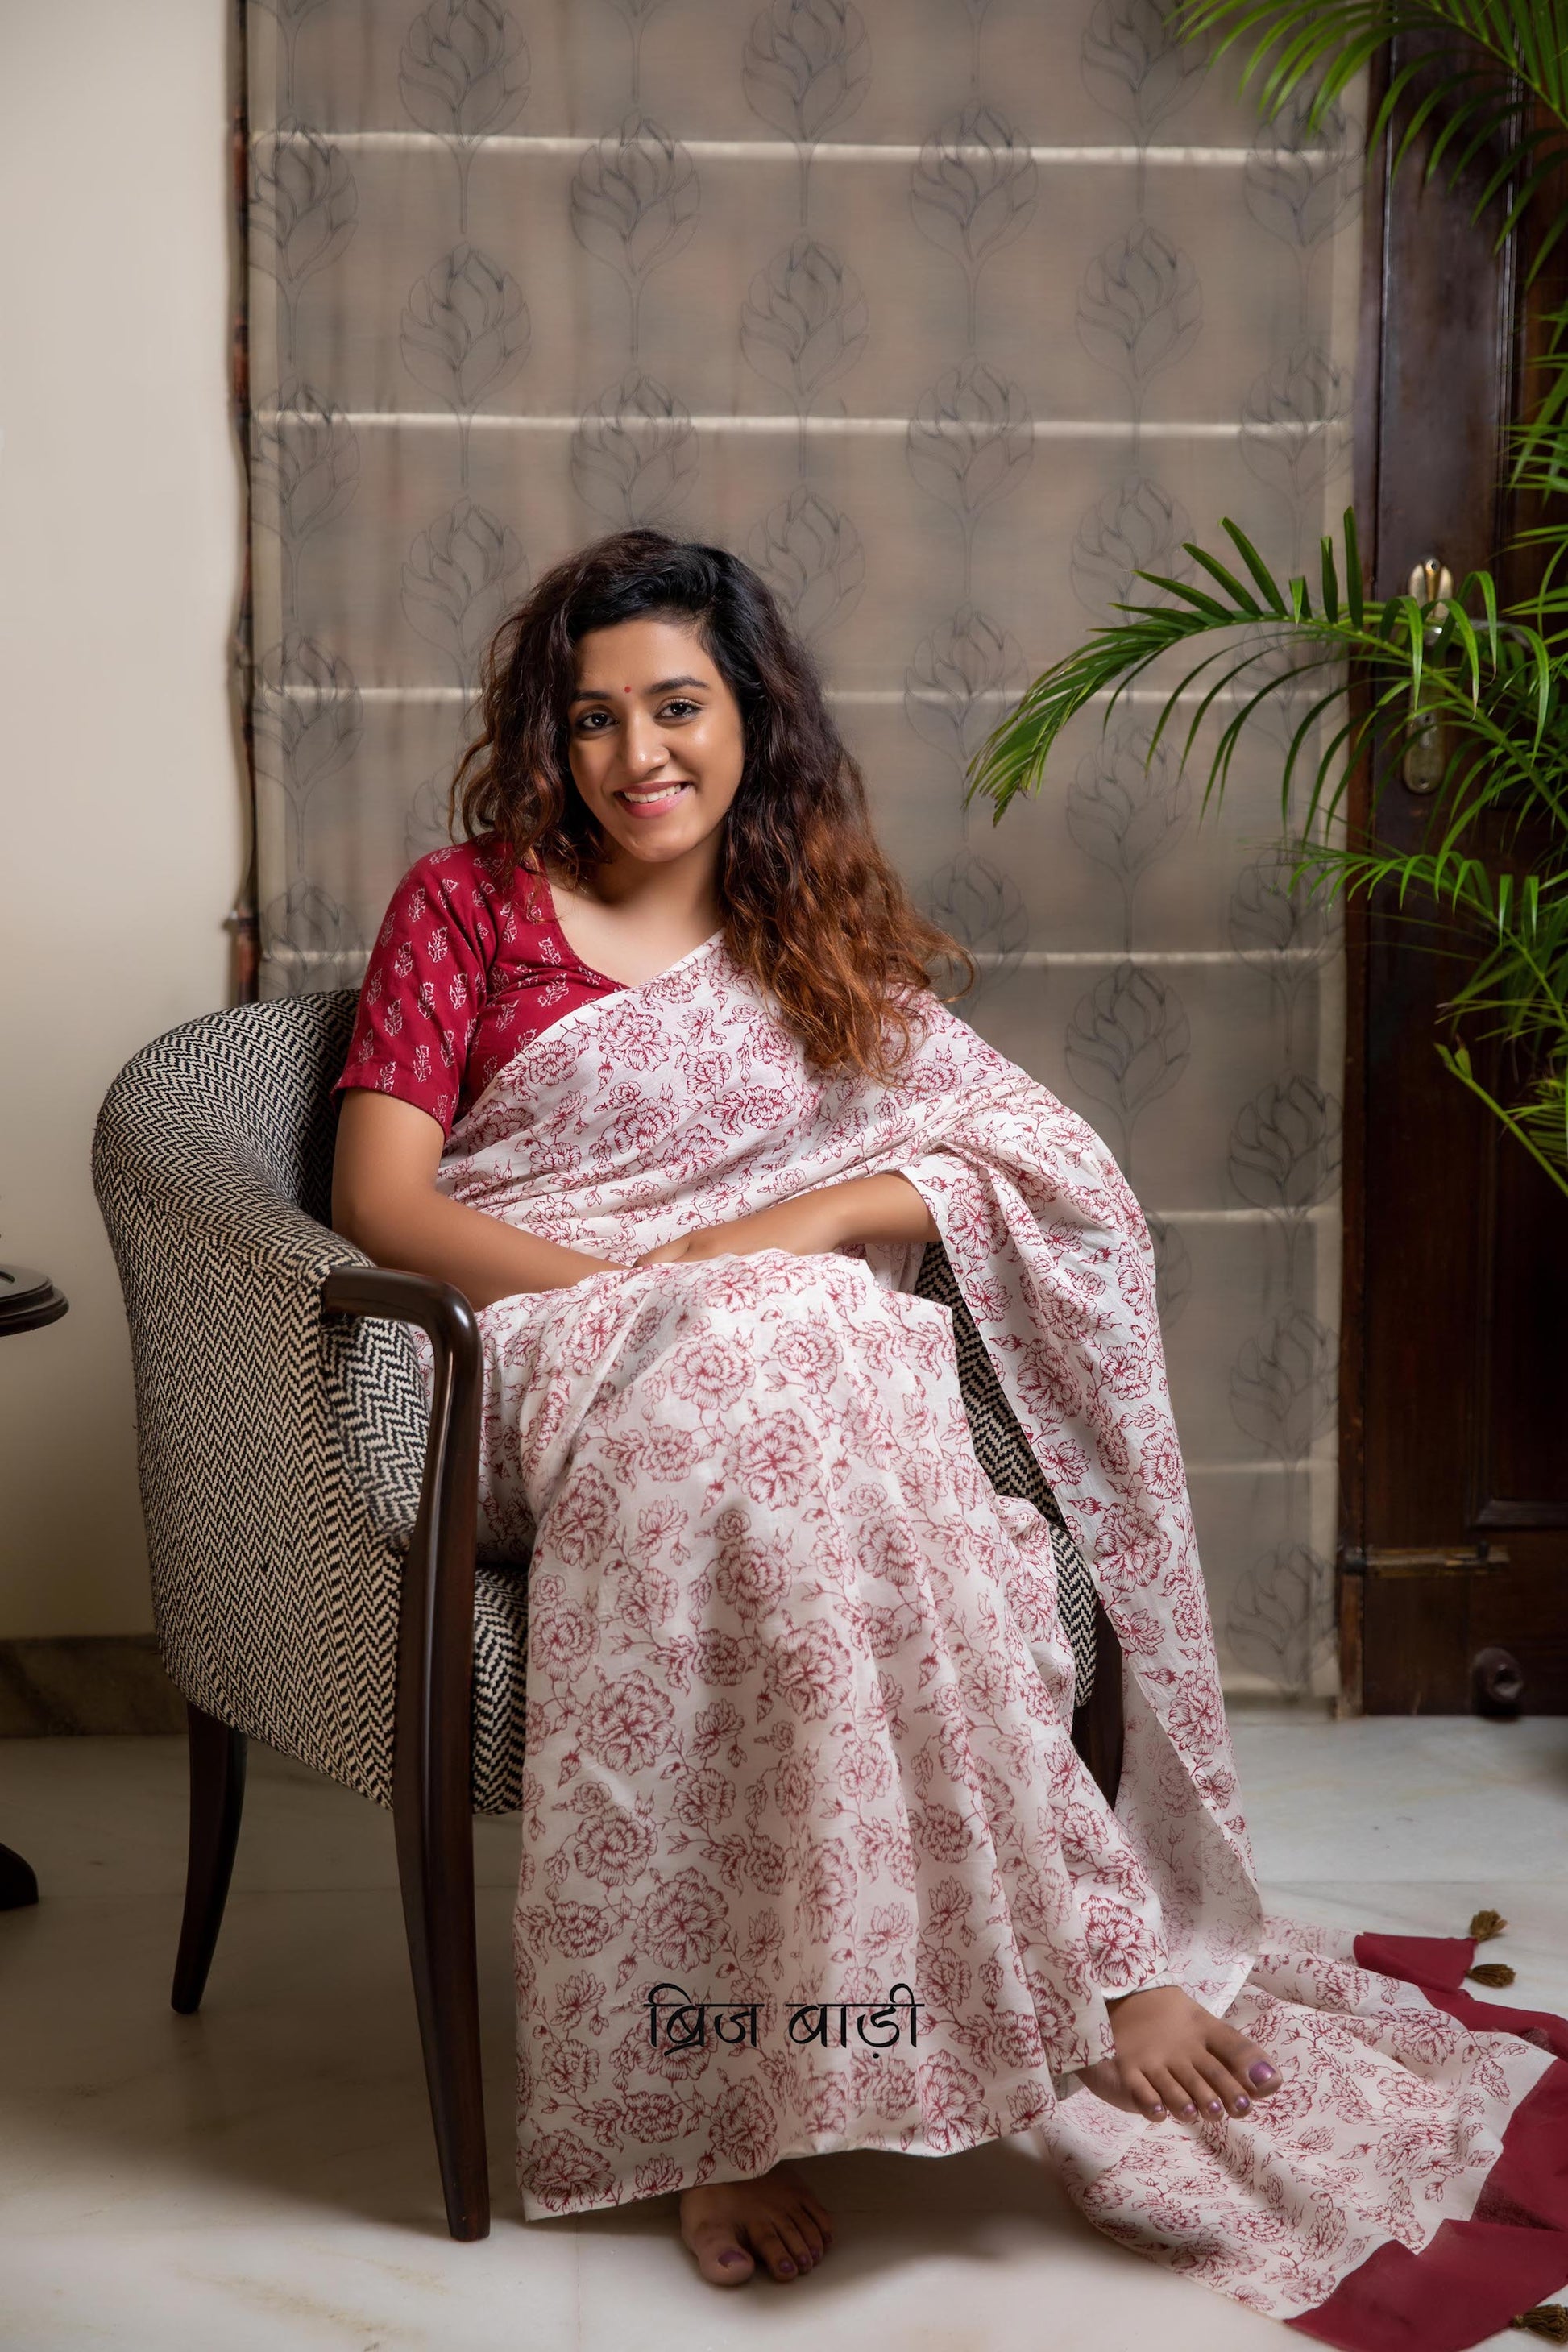 Gulab’ saree is handcrafted in fine quality mulmul cotton in off-white. The intricate rose pattern on the fabric has been hand block printed by our artisans. t has beautiful handmade thread tassels stitched to its pallu. Free Shipping Pan India